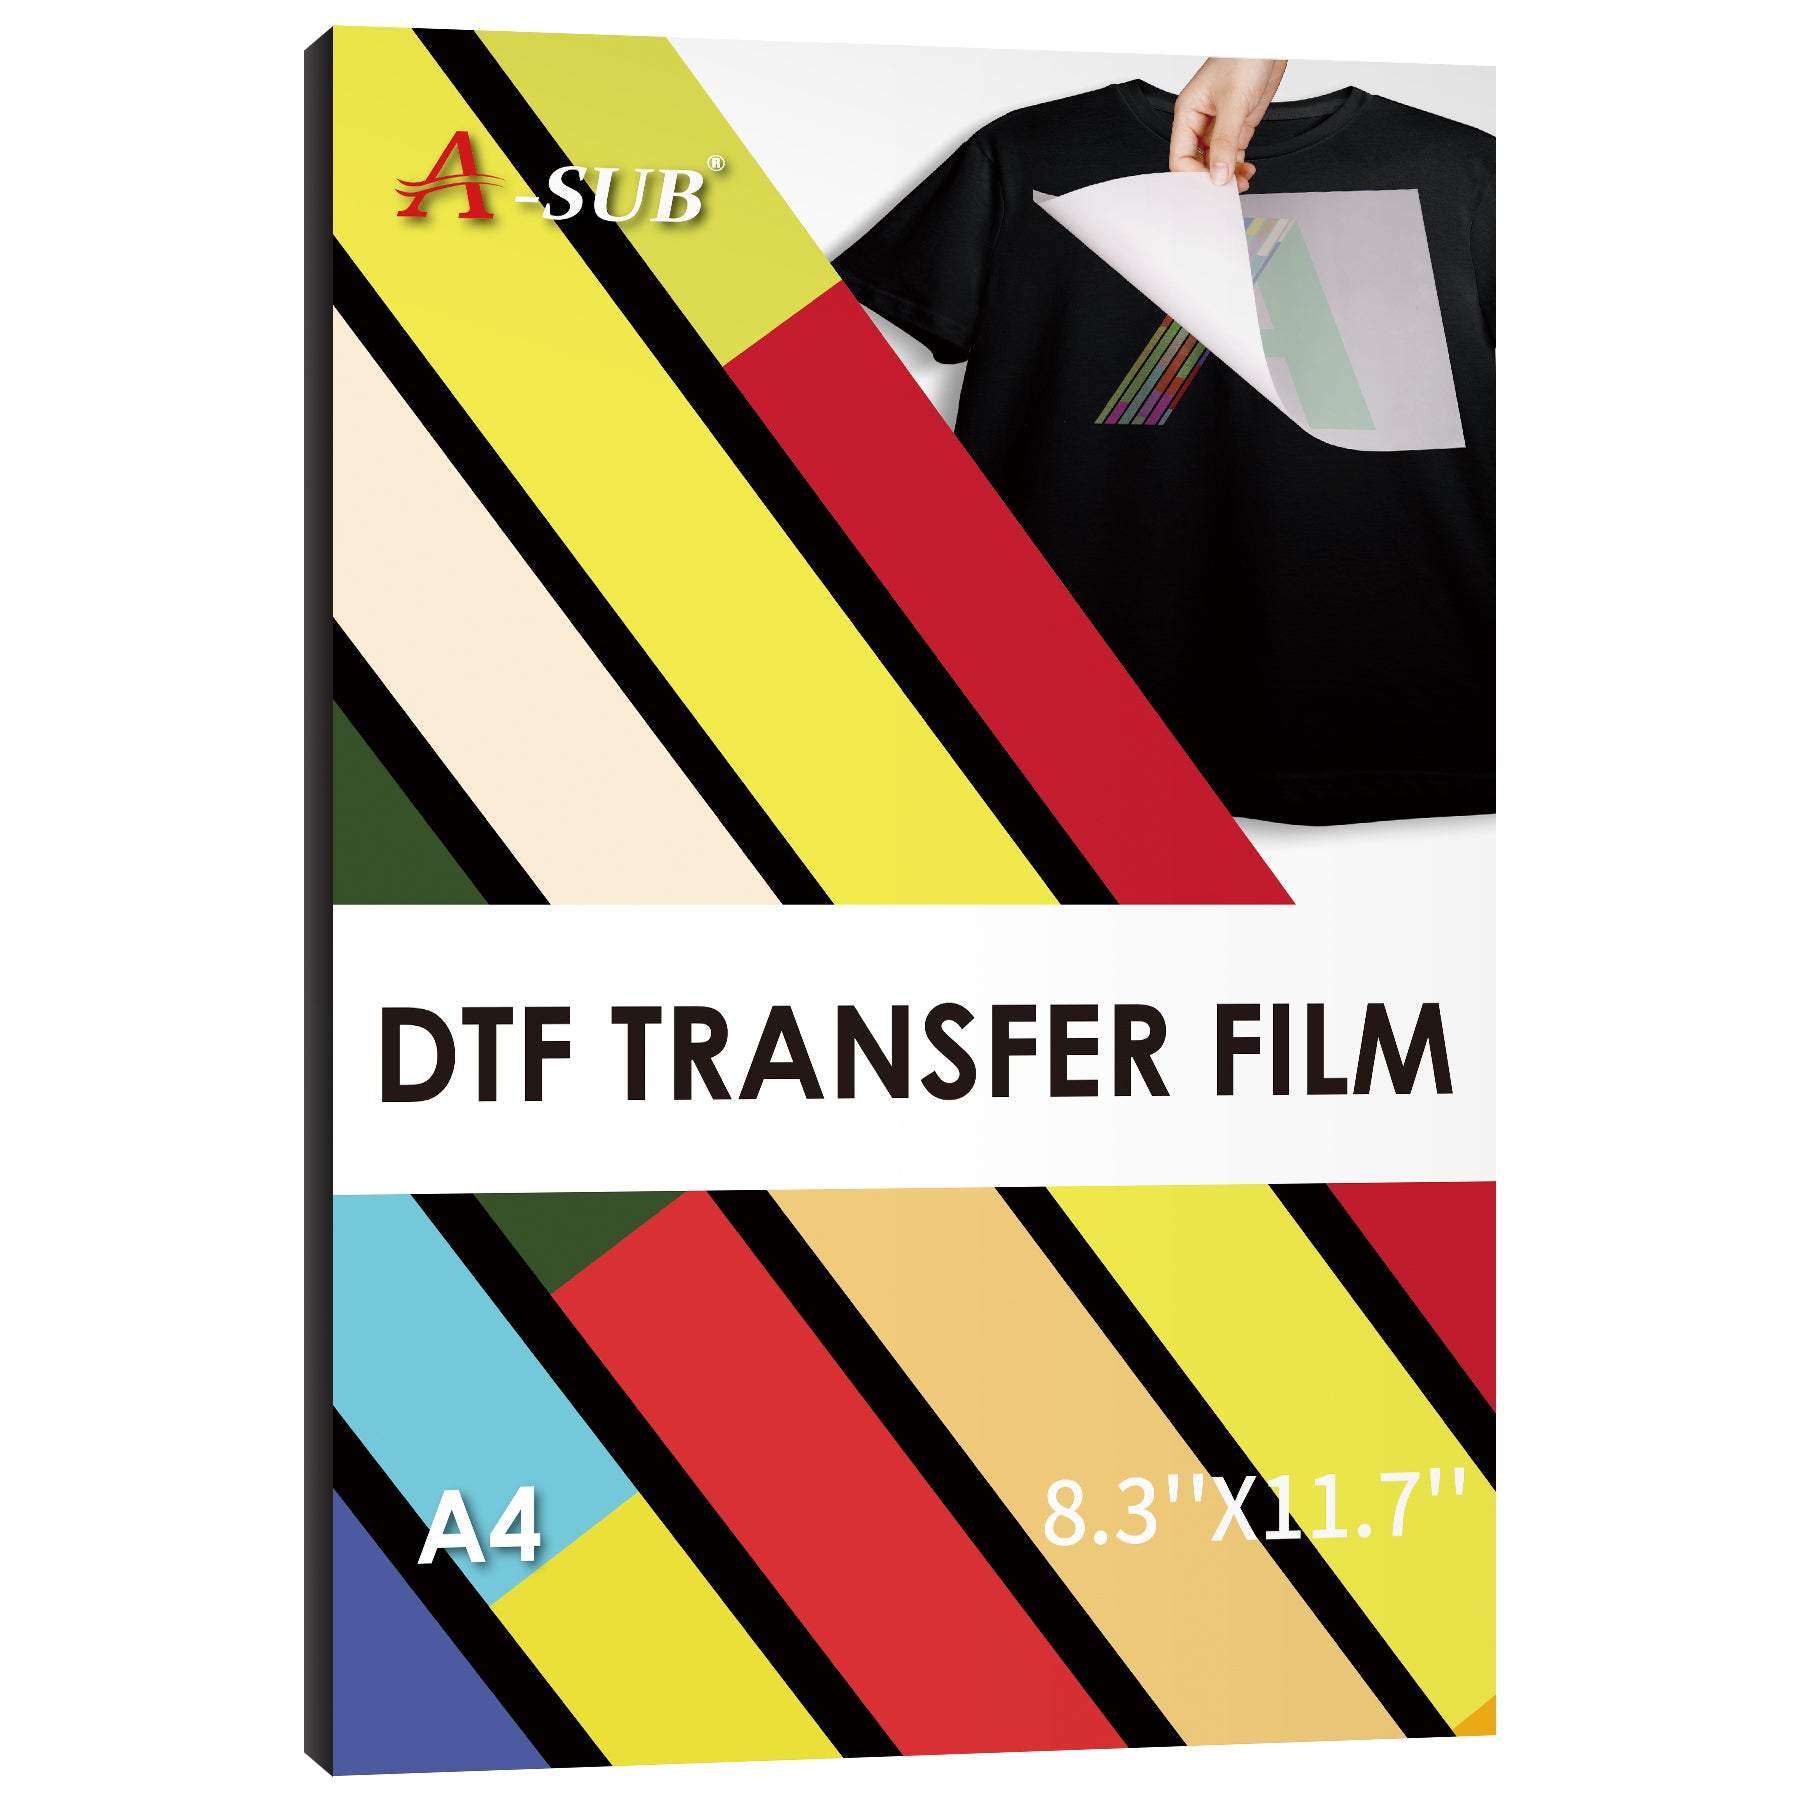 Dtf Transfer Film 30 Sheets Double-sided Glossy Clear Pretreat Dtf